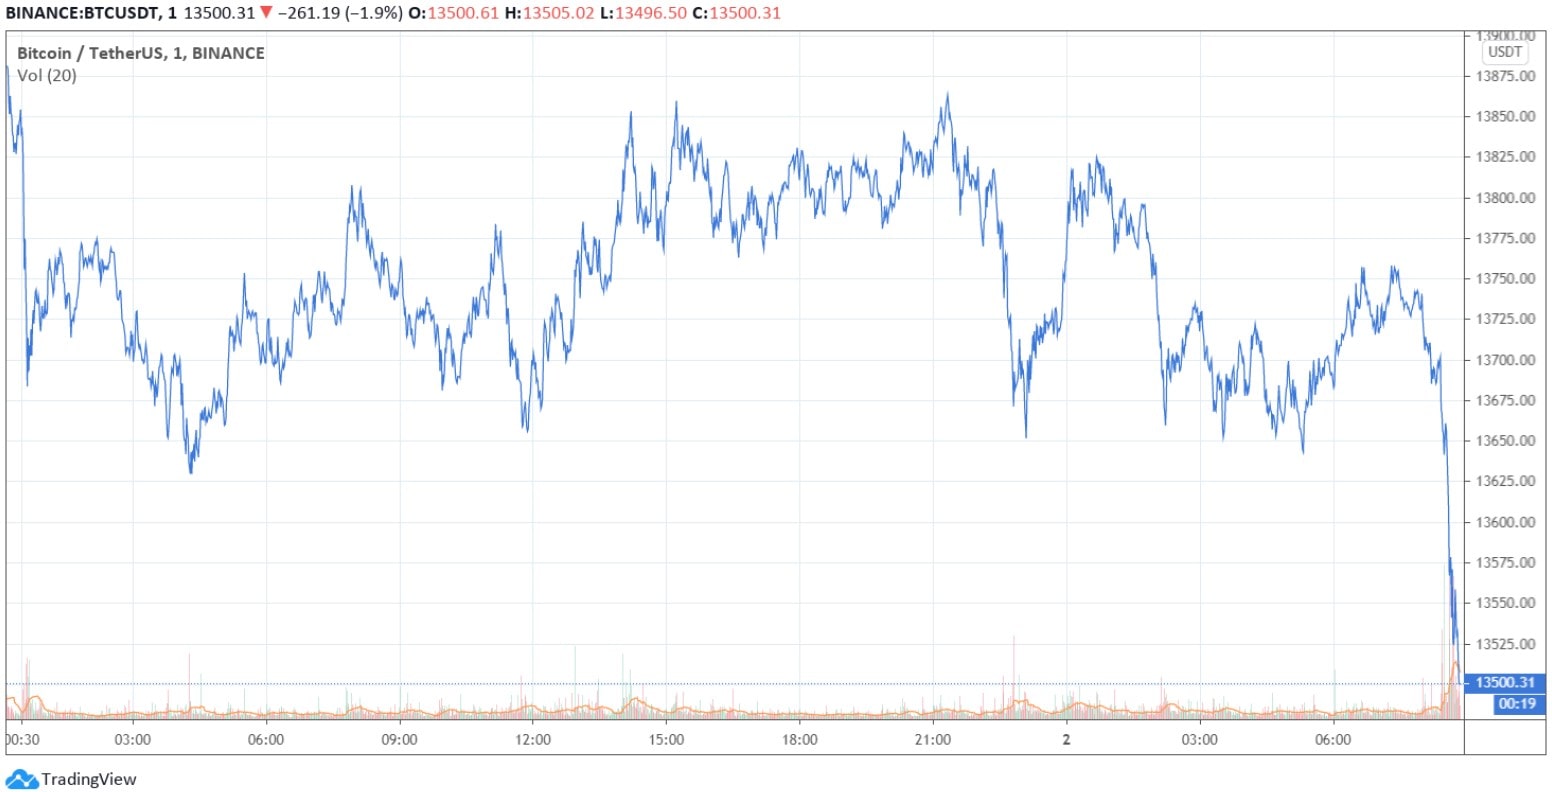 Monday’s Market Watch: Bitcoin Drops $300 In Minutes, Elections Volatility Incoming?